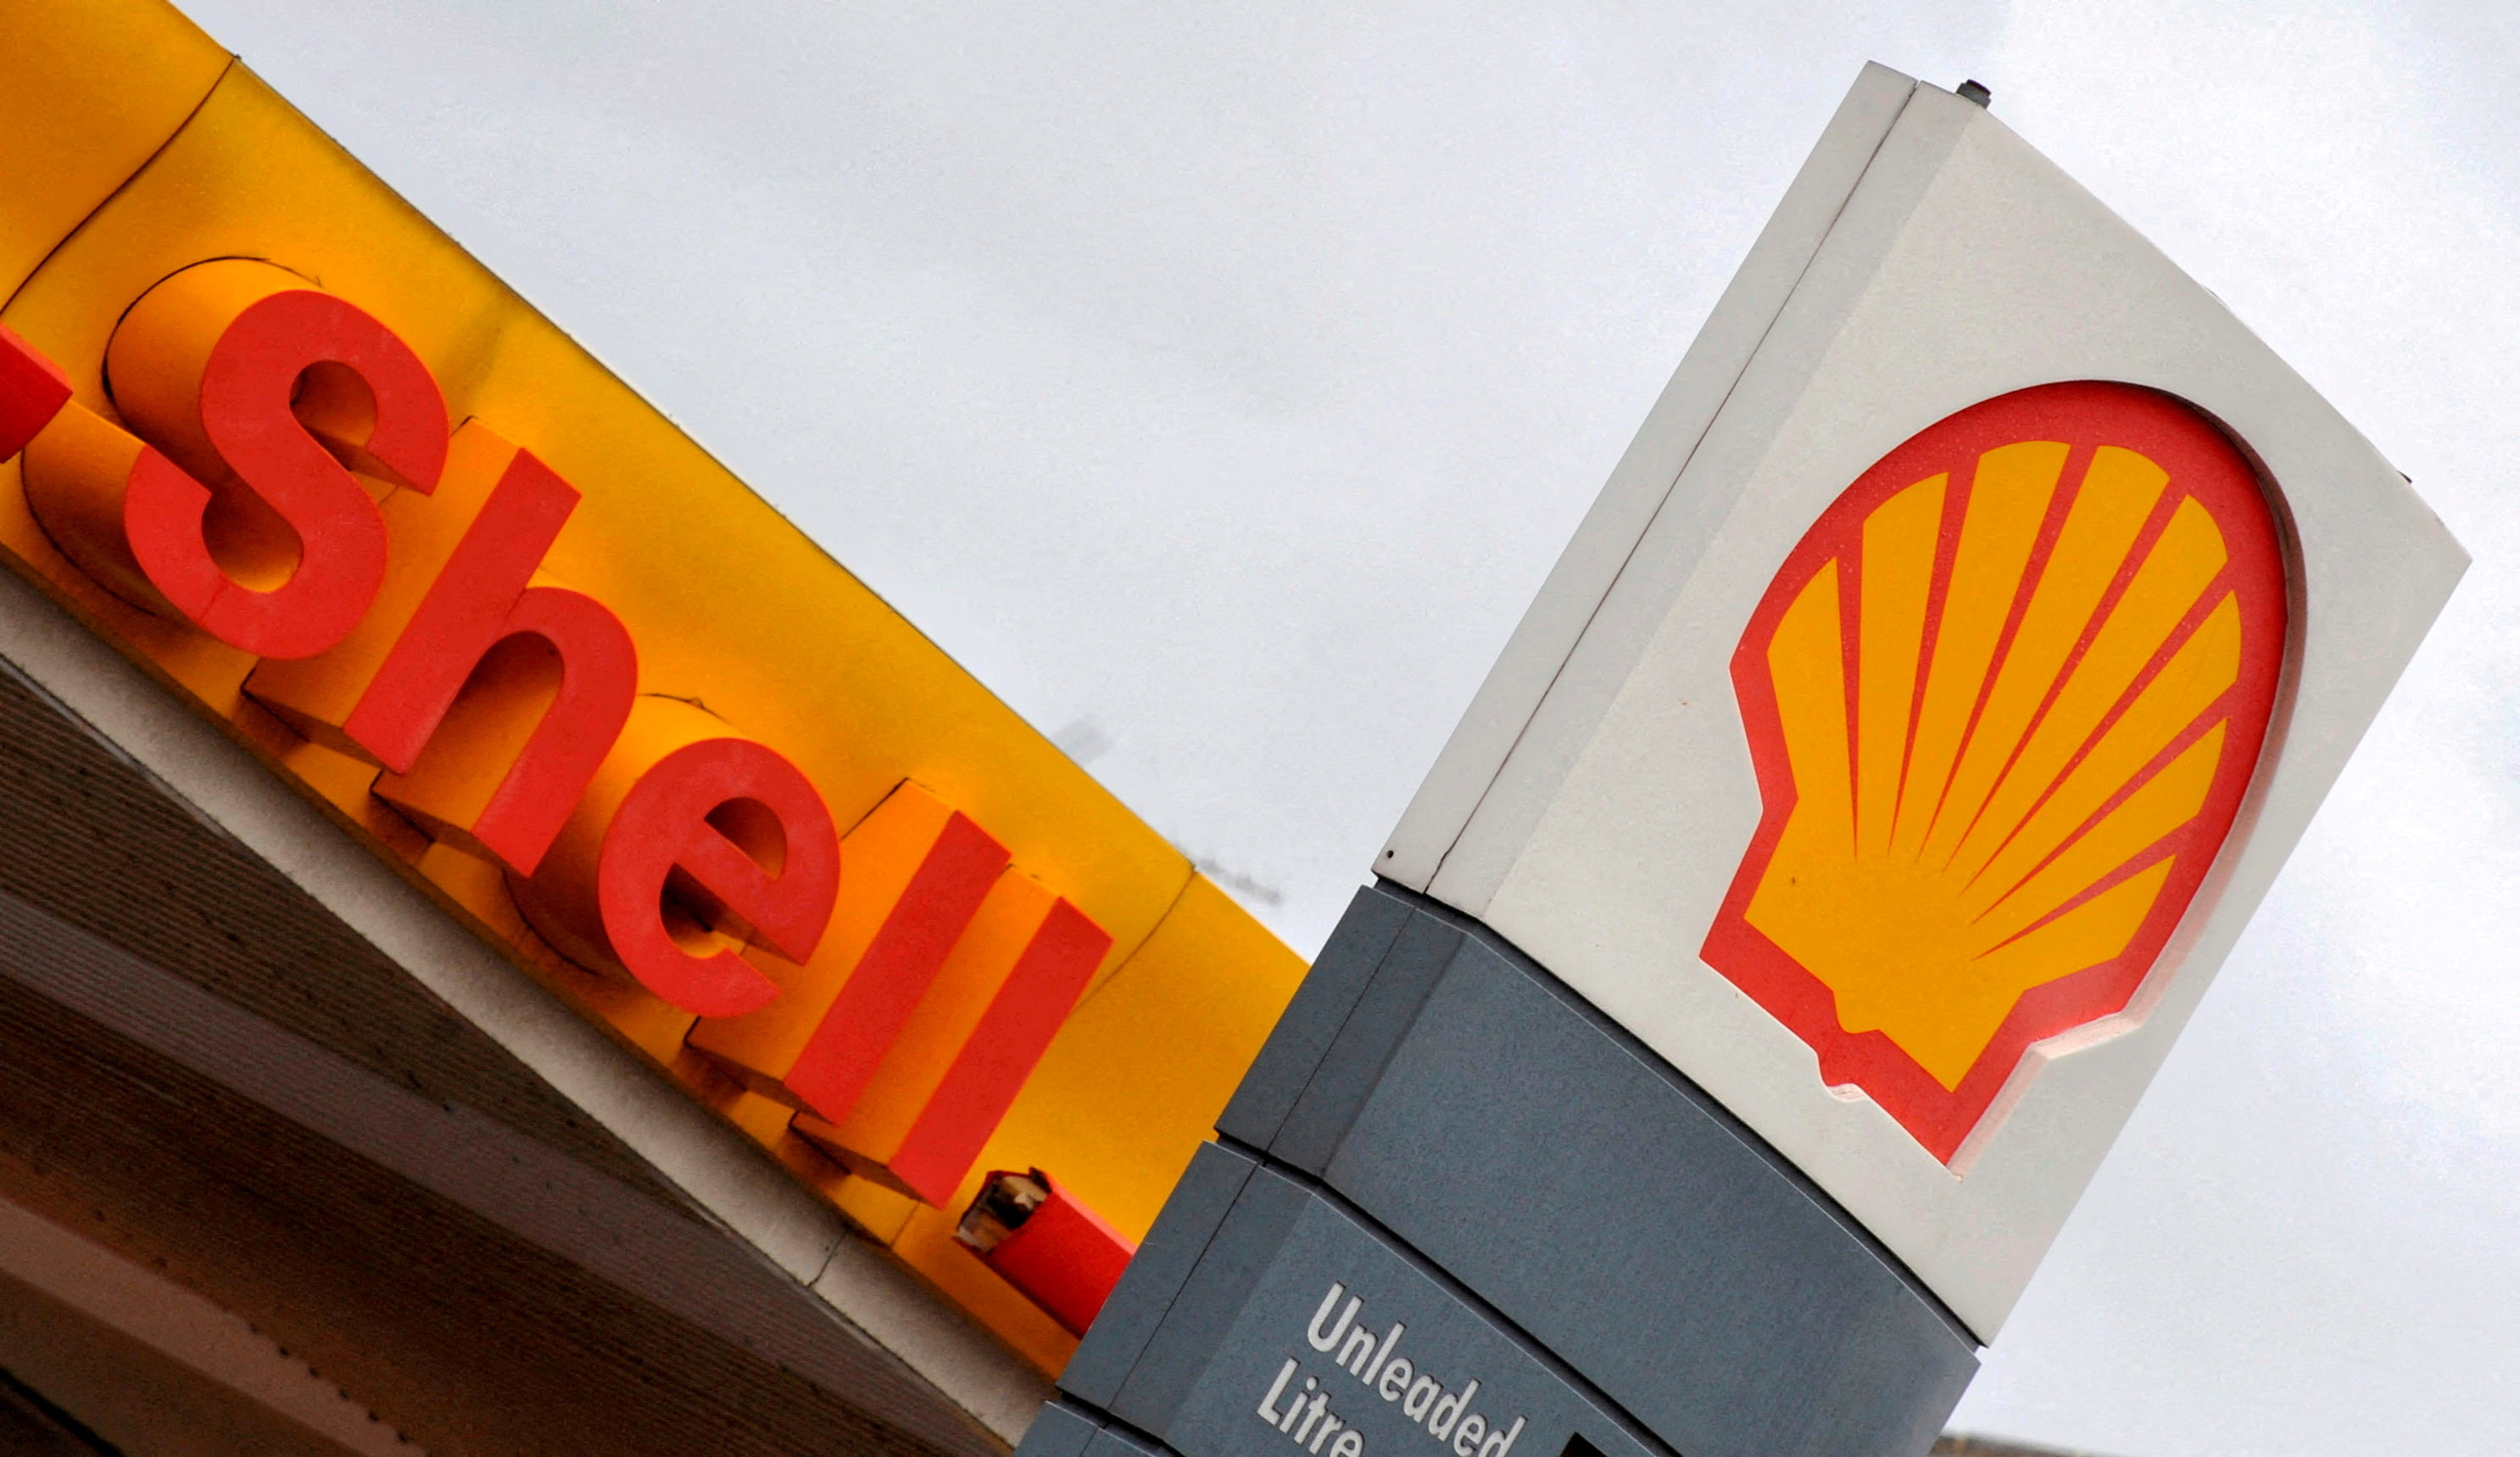 The Shell logo is seen at a Shell petrol station in London, UK